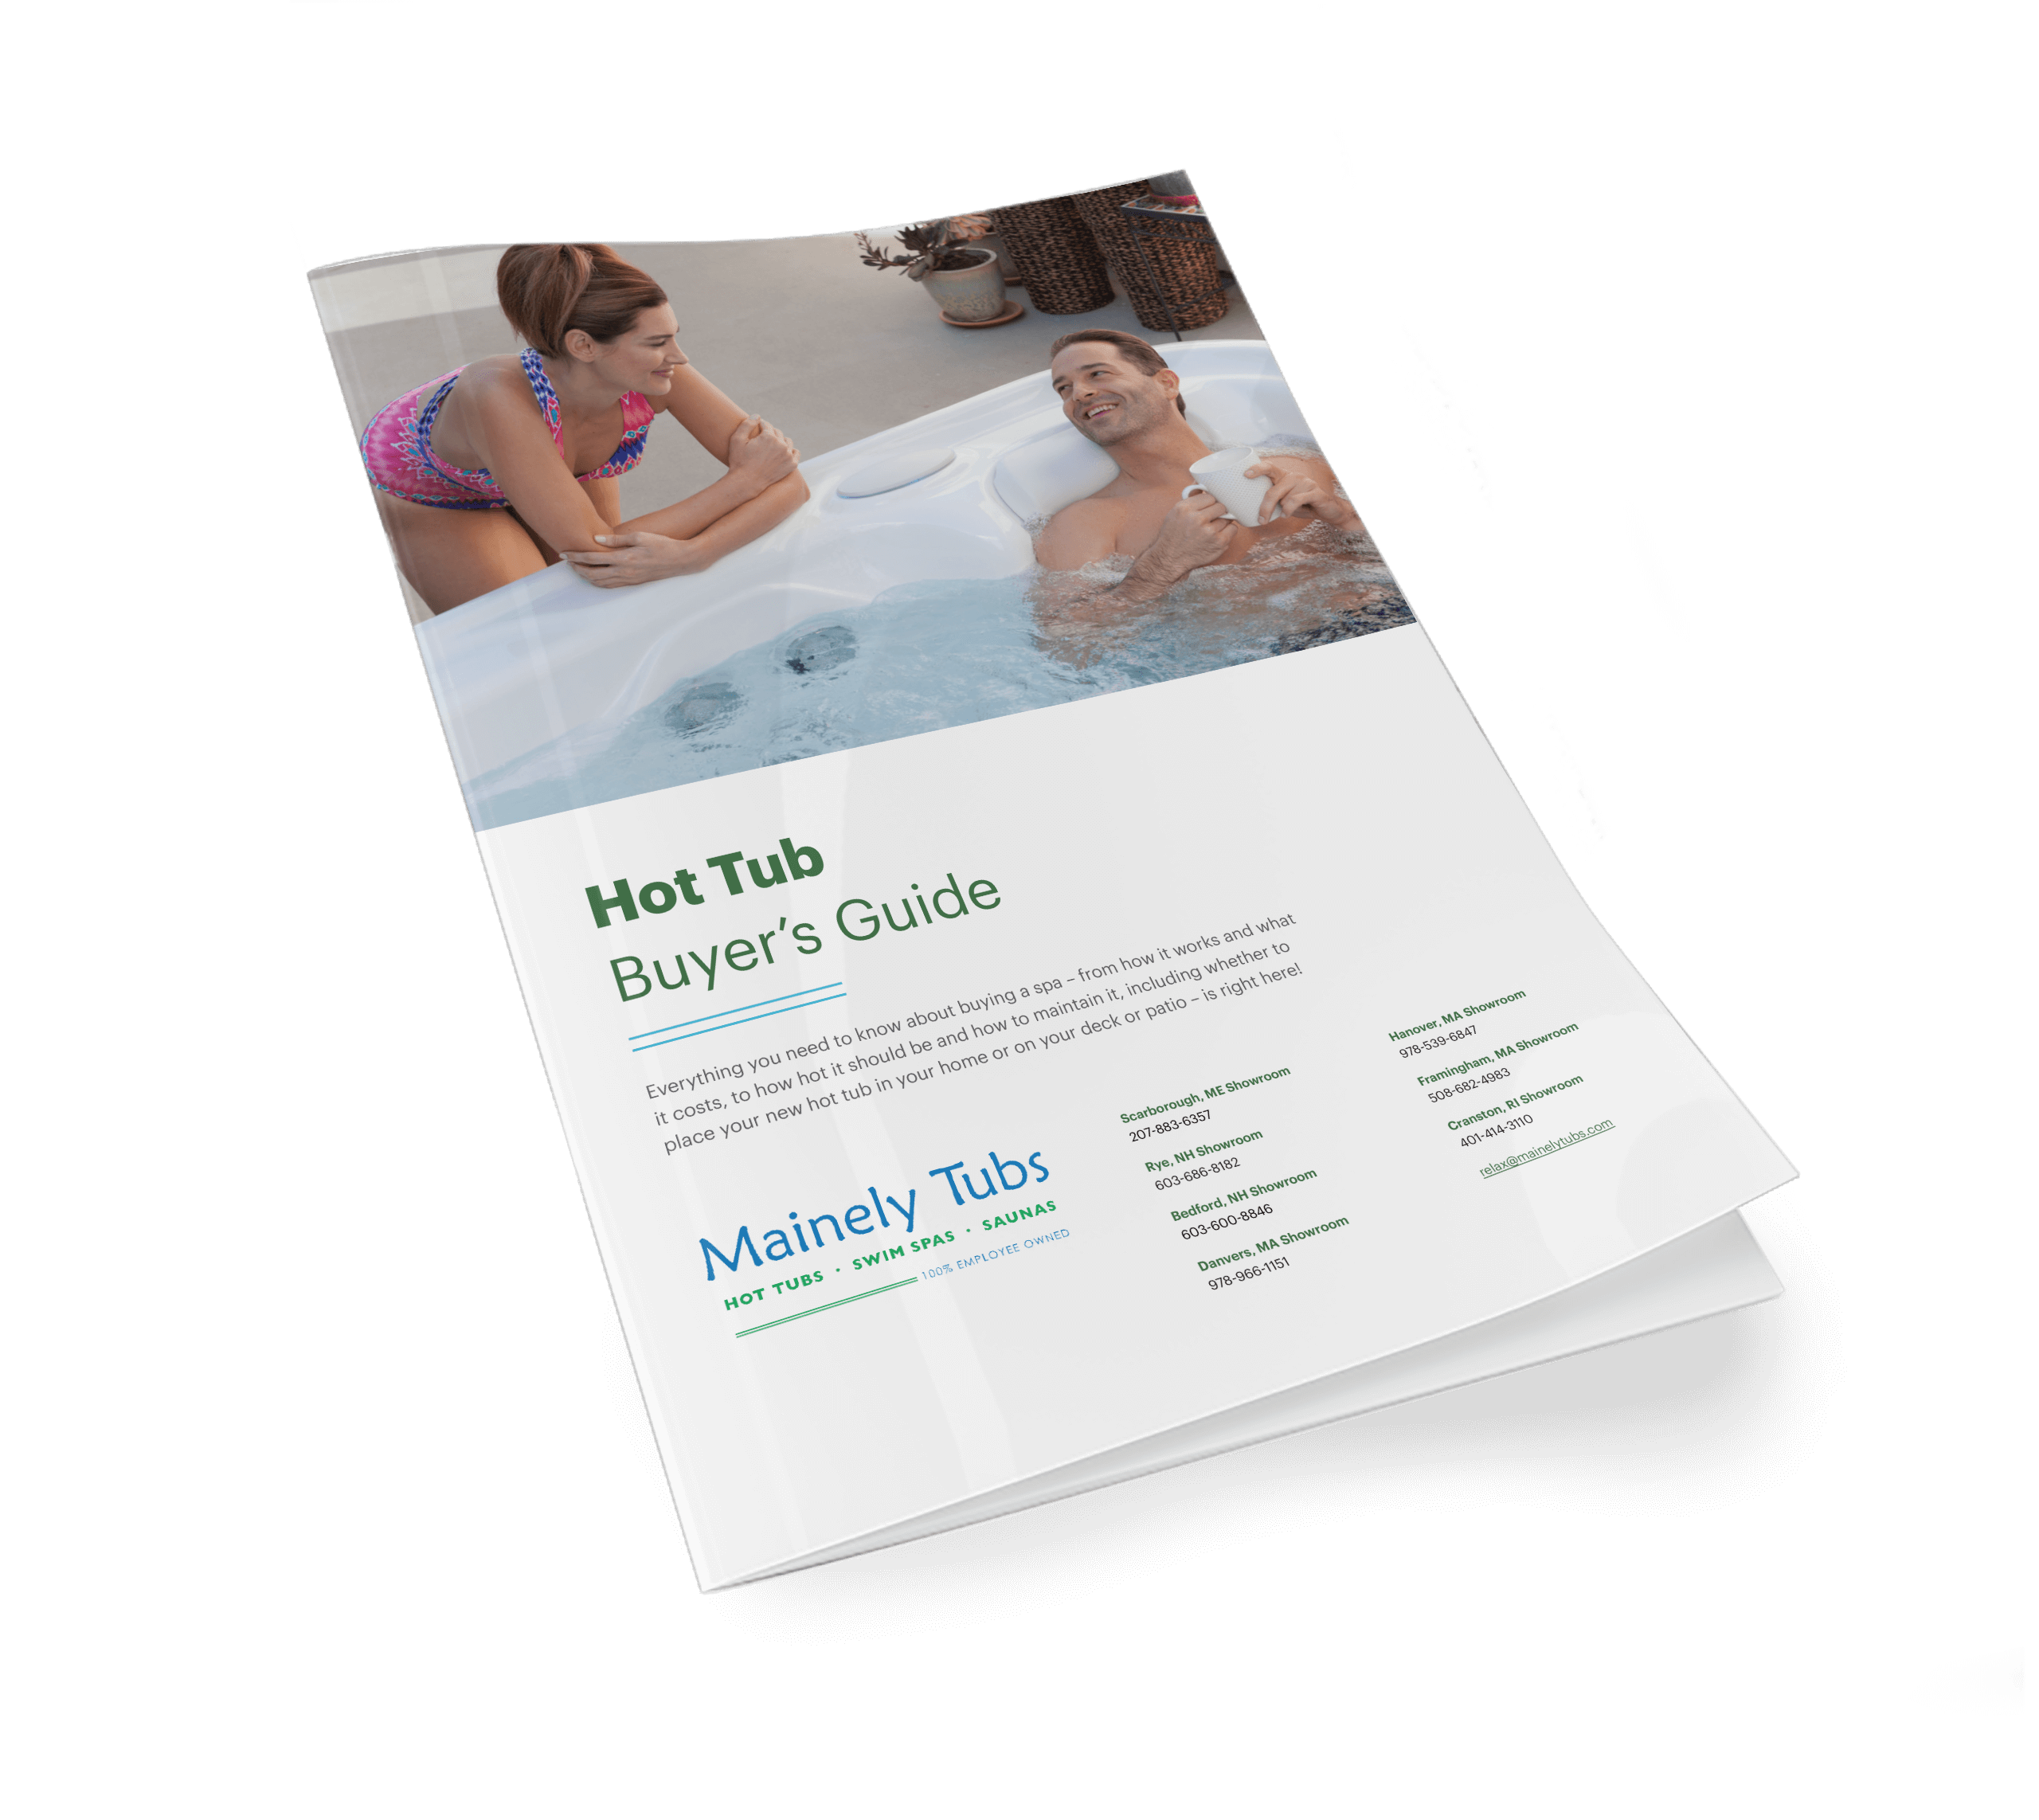 Hot Tub Buyer's Guide